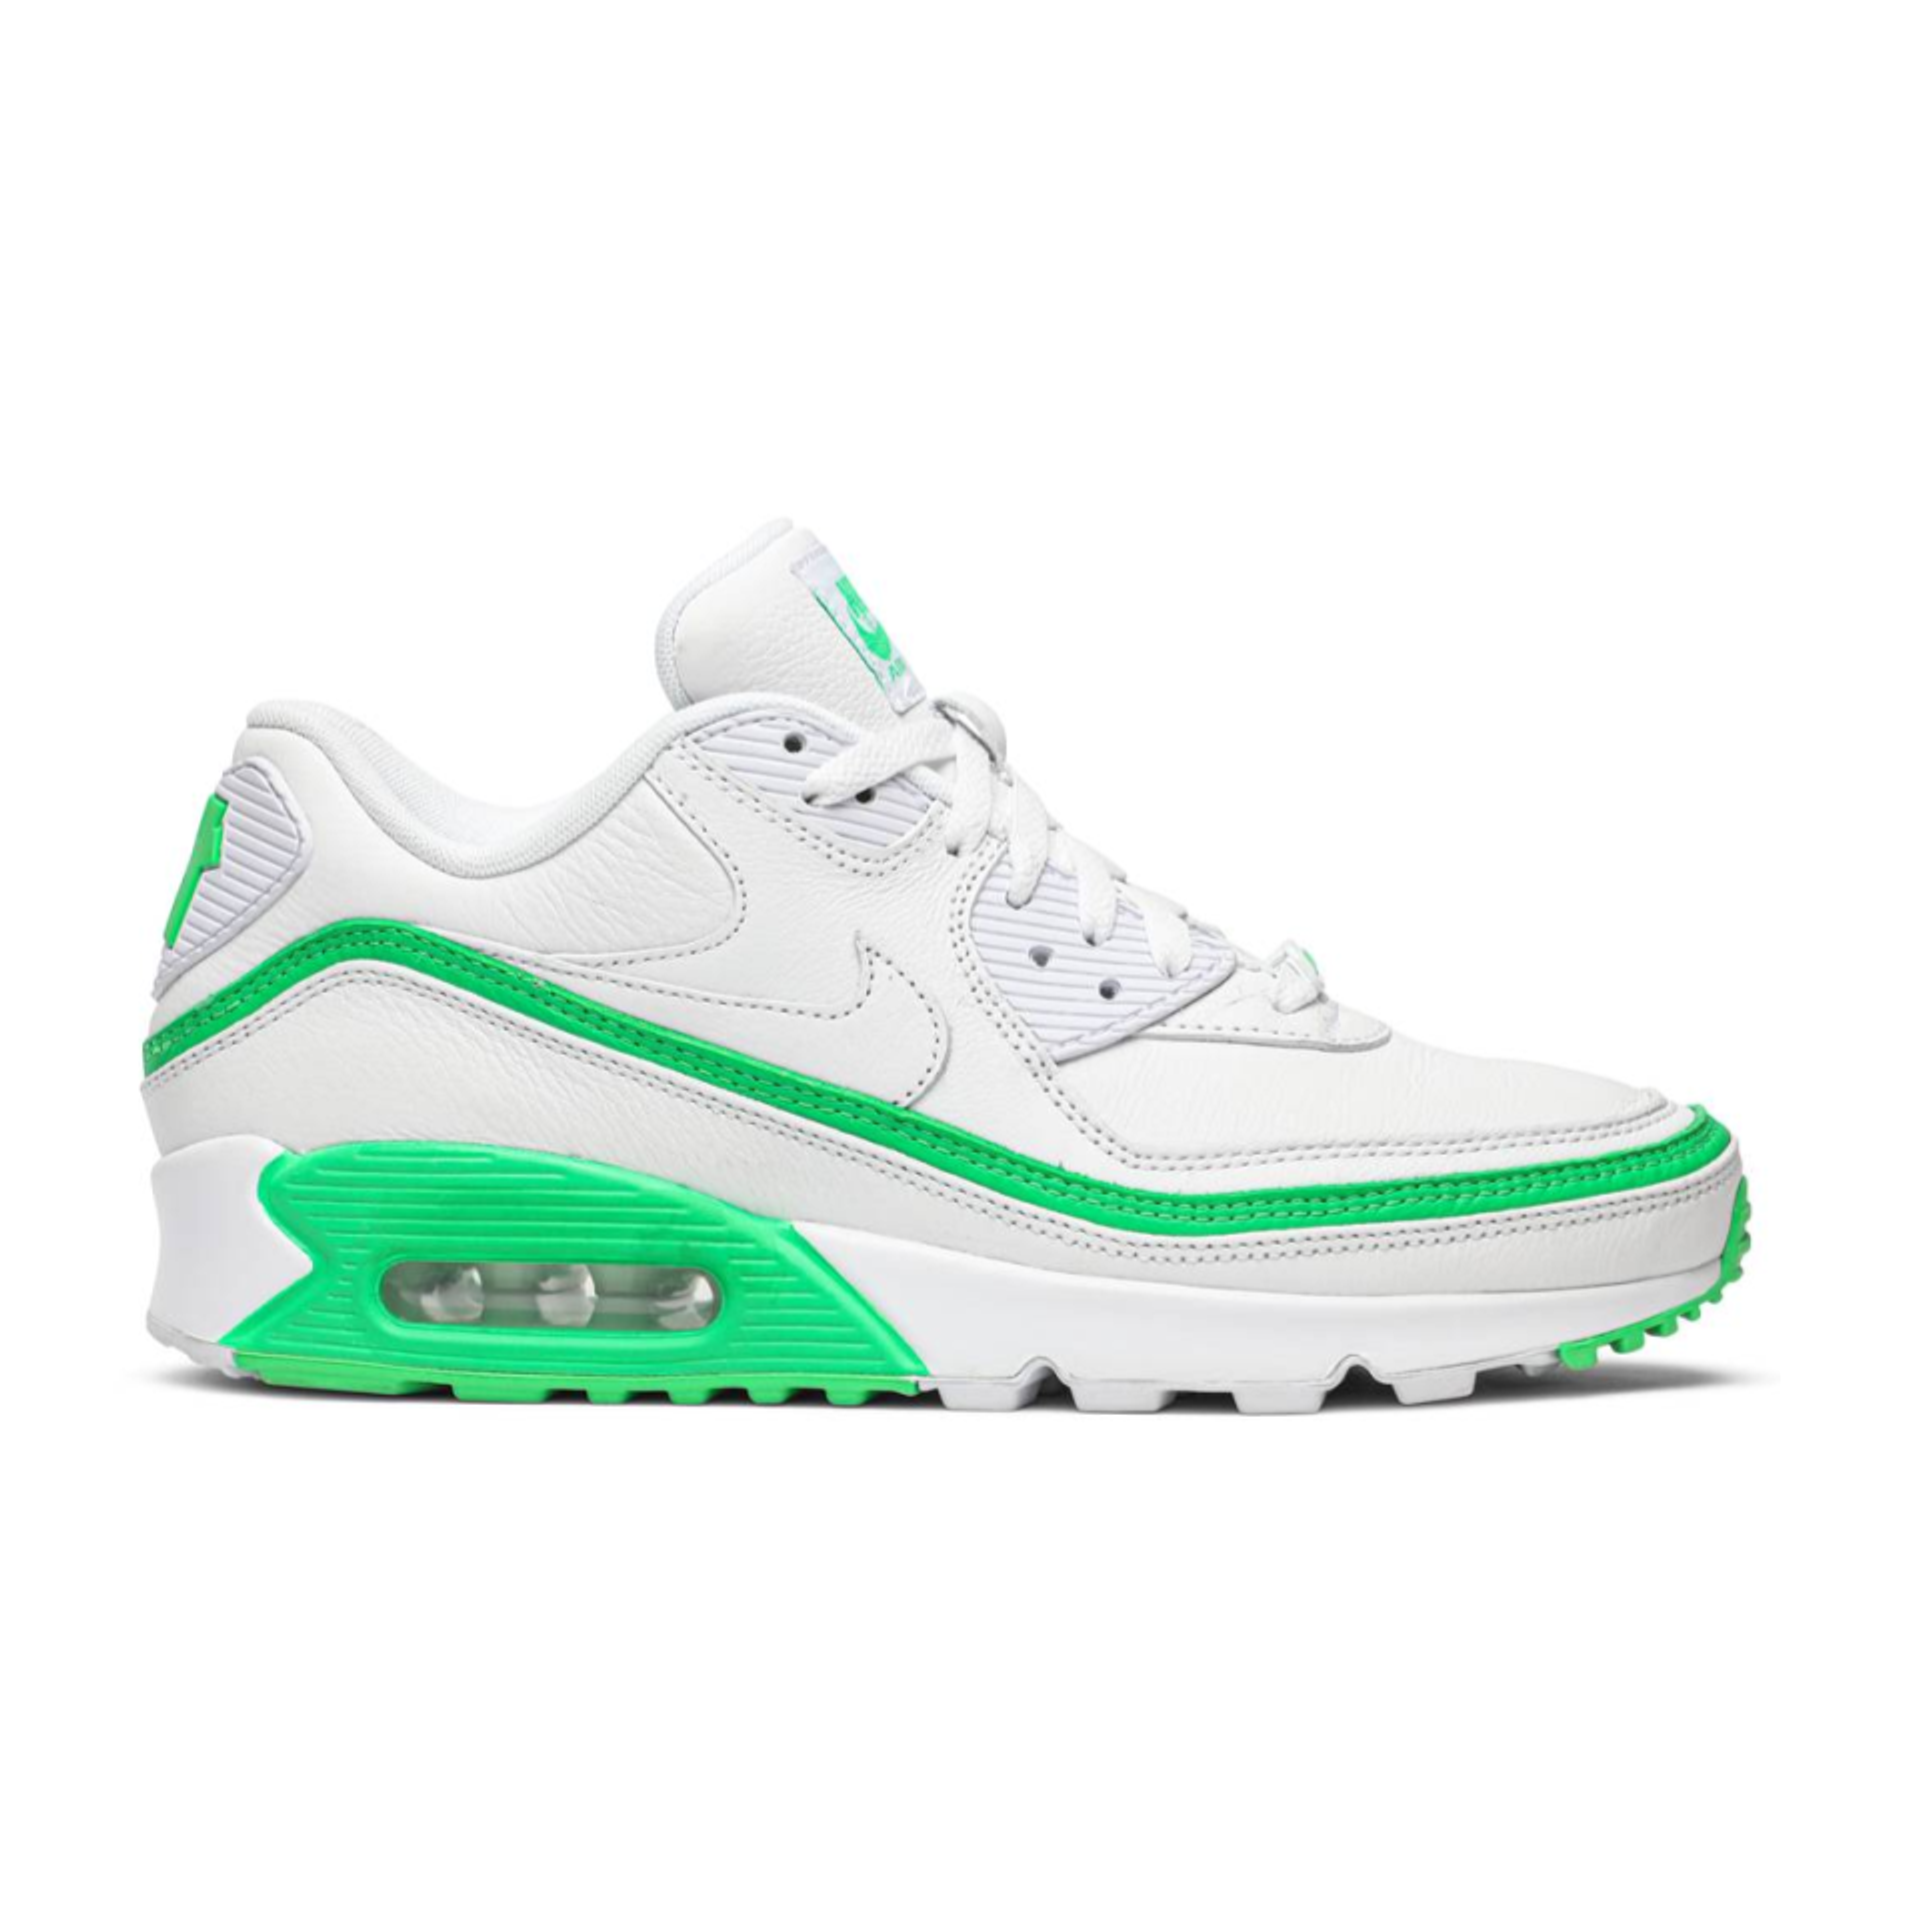 Nike Undefeated x Air Max 90 'White Green Spark'